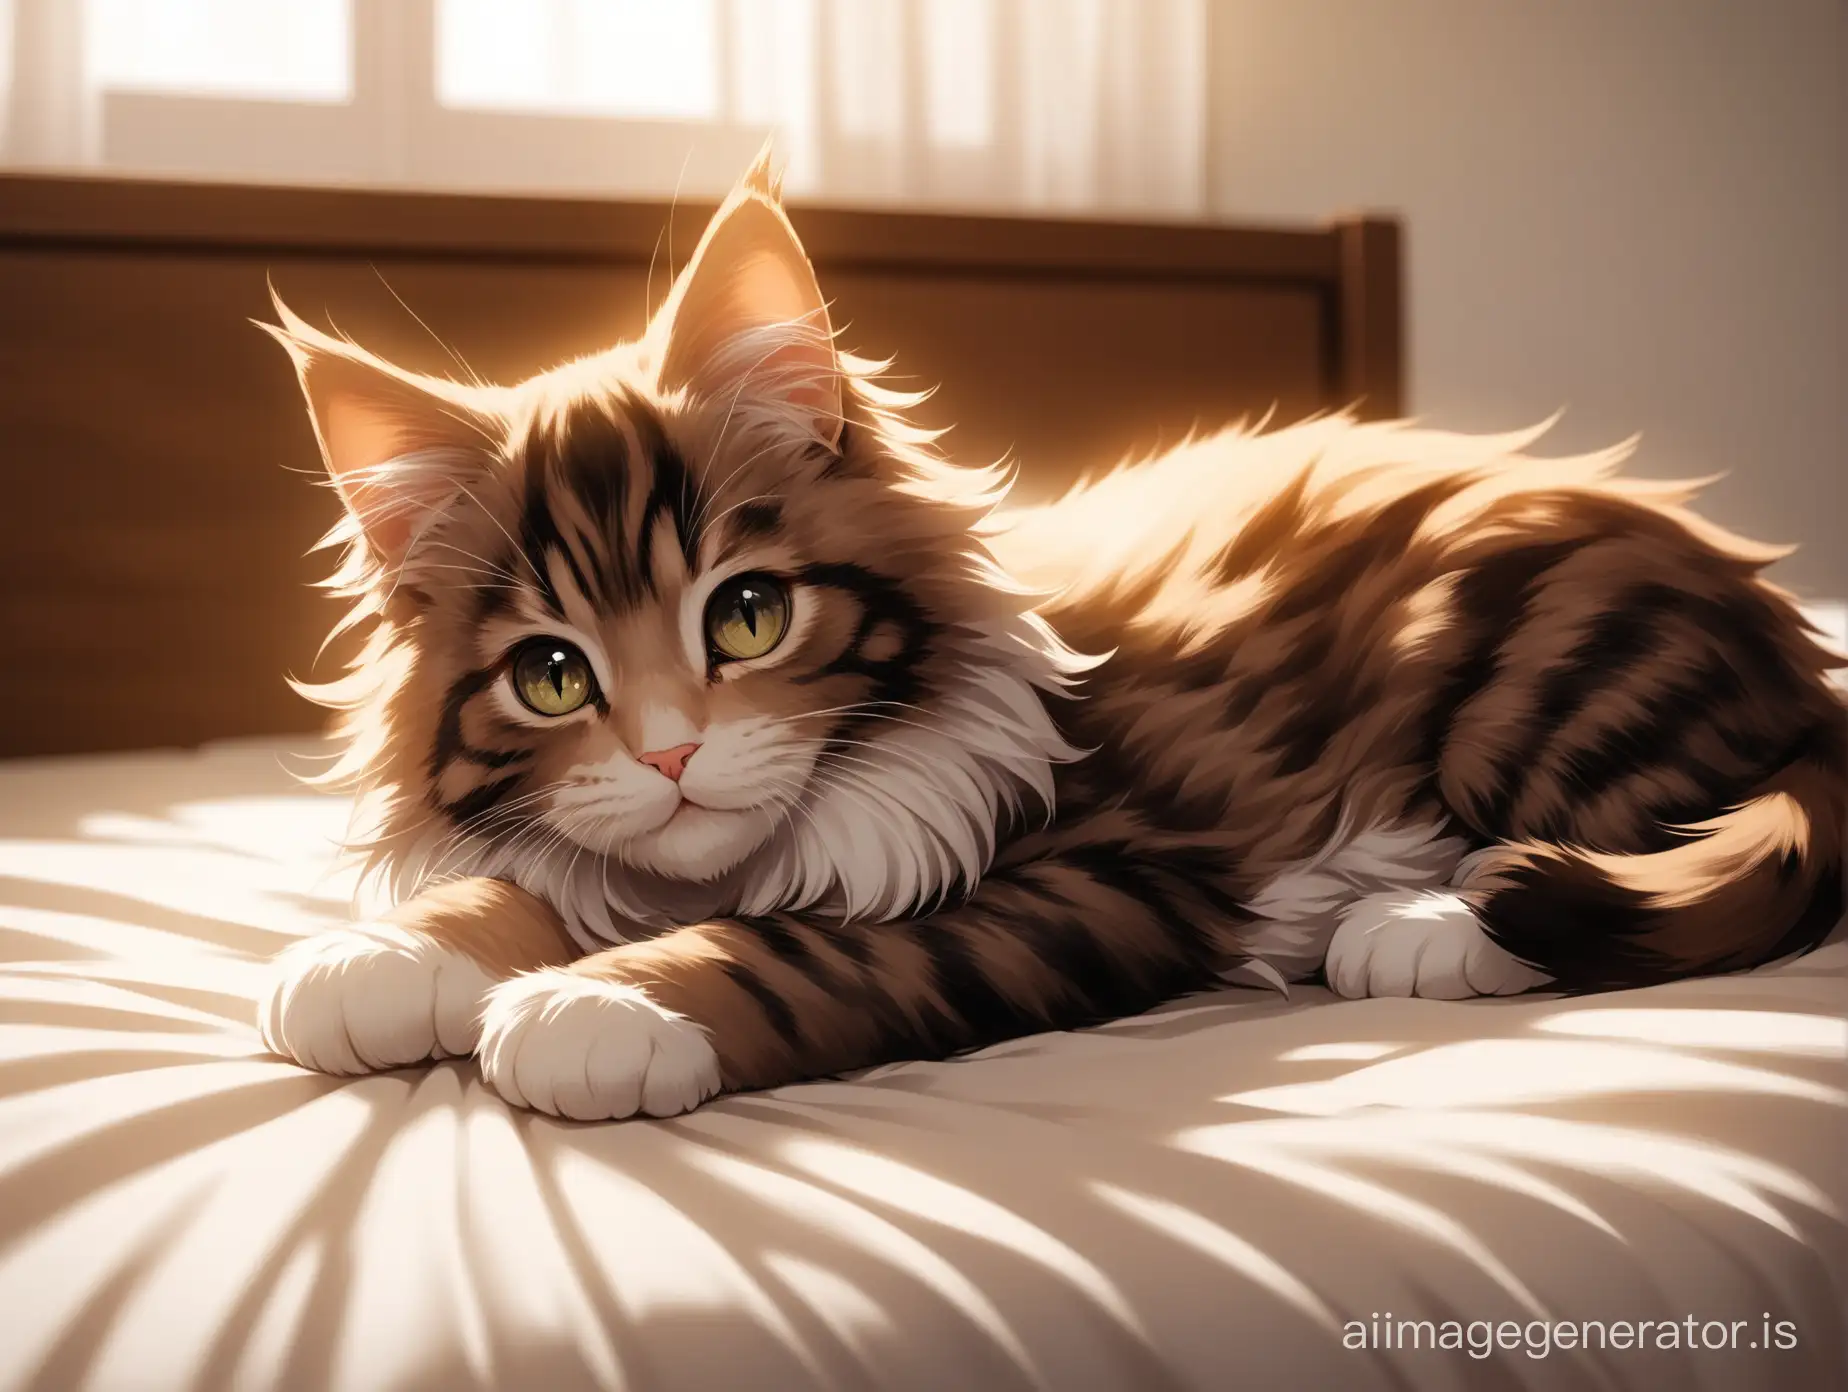 Cuddly-Maine-Coon-Kitten-Relaxing-with-White-Rose-on-Bed-UHD-Studio-Portrait